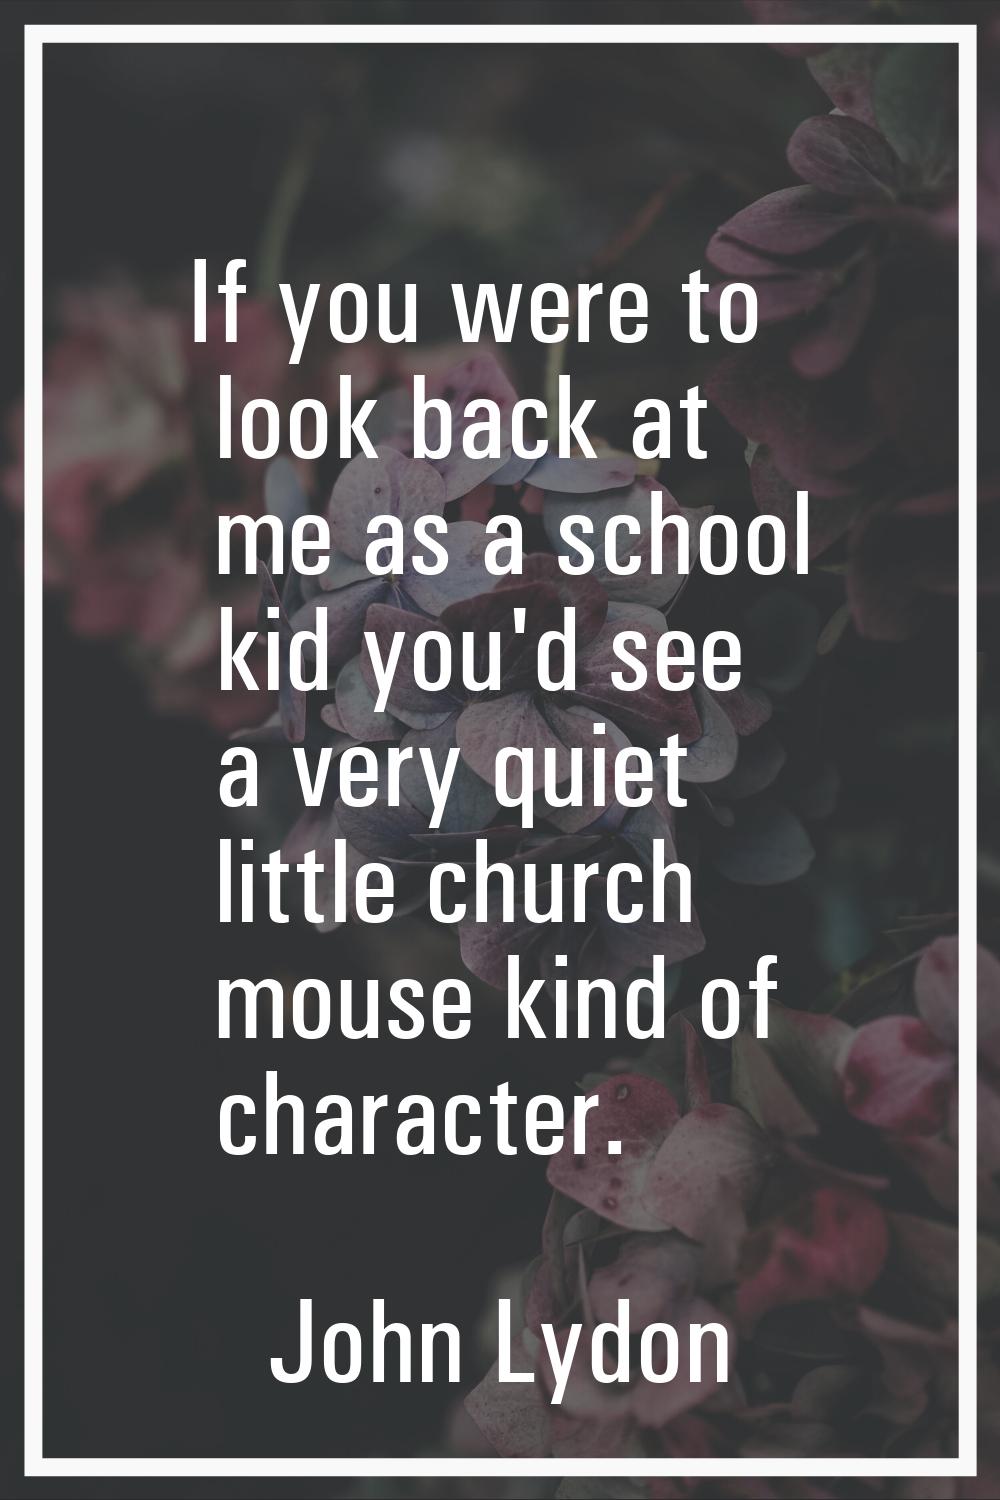 If you were to look back at me as a school kid you'd see a very quiet little church mouse kind of c